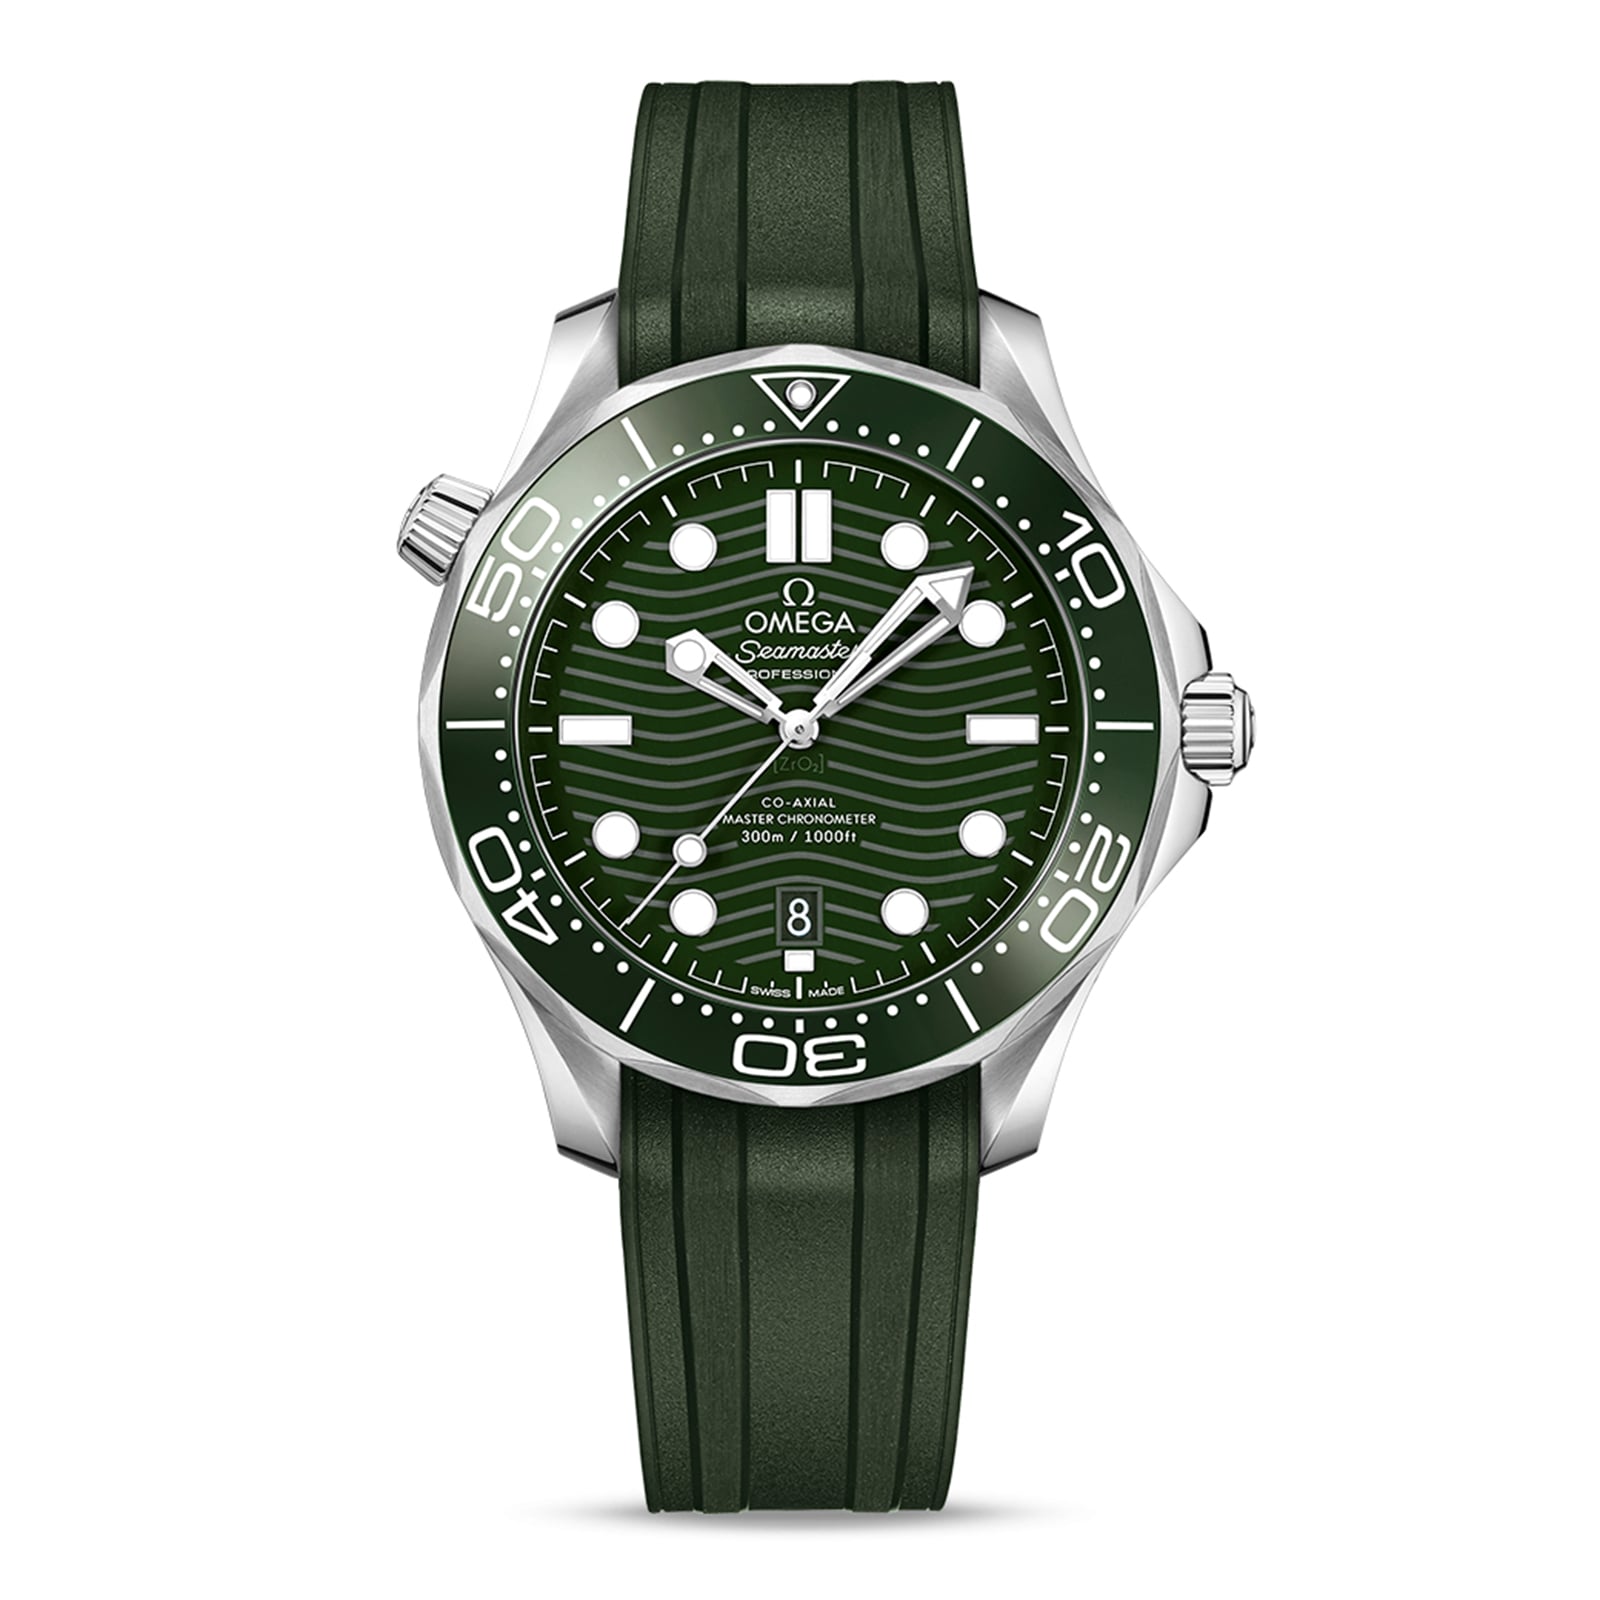 Photos - Wrist Watch Omega Seamaster Diver 300m Co-Axial Master Chronometer 42mm Mens Watch Green 